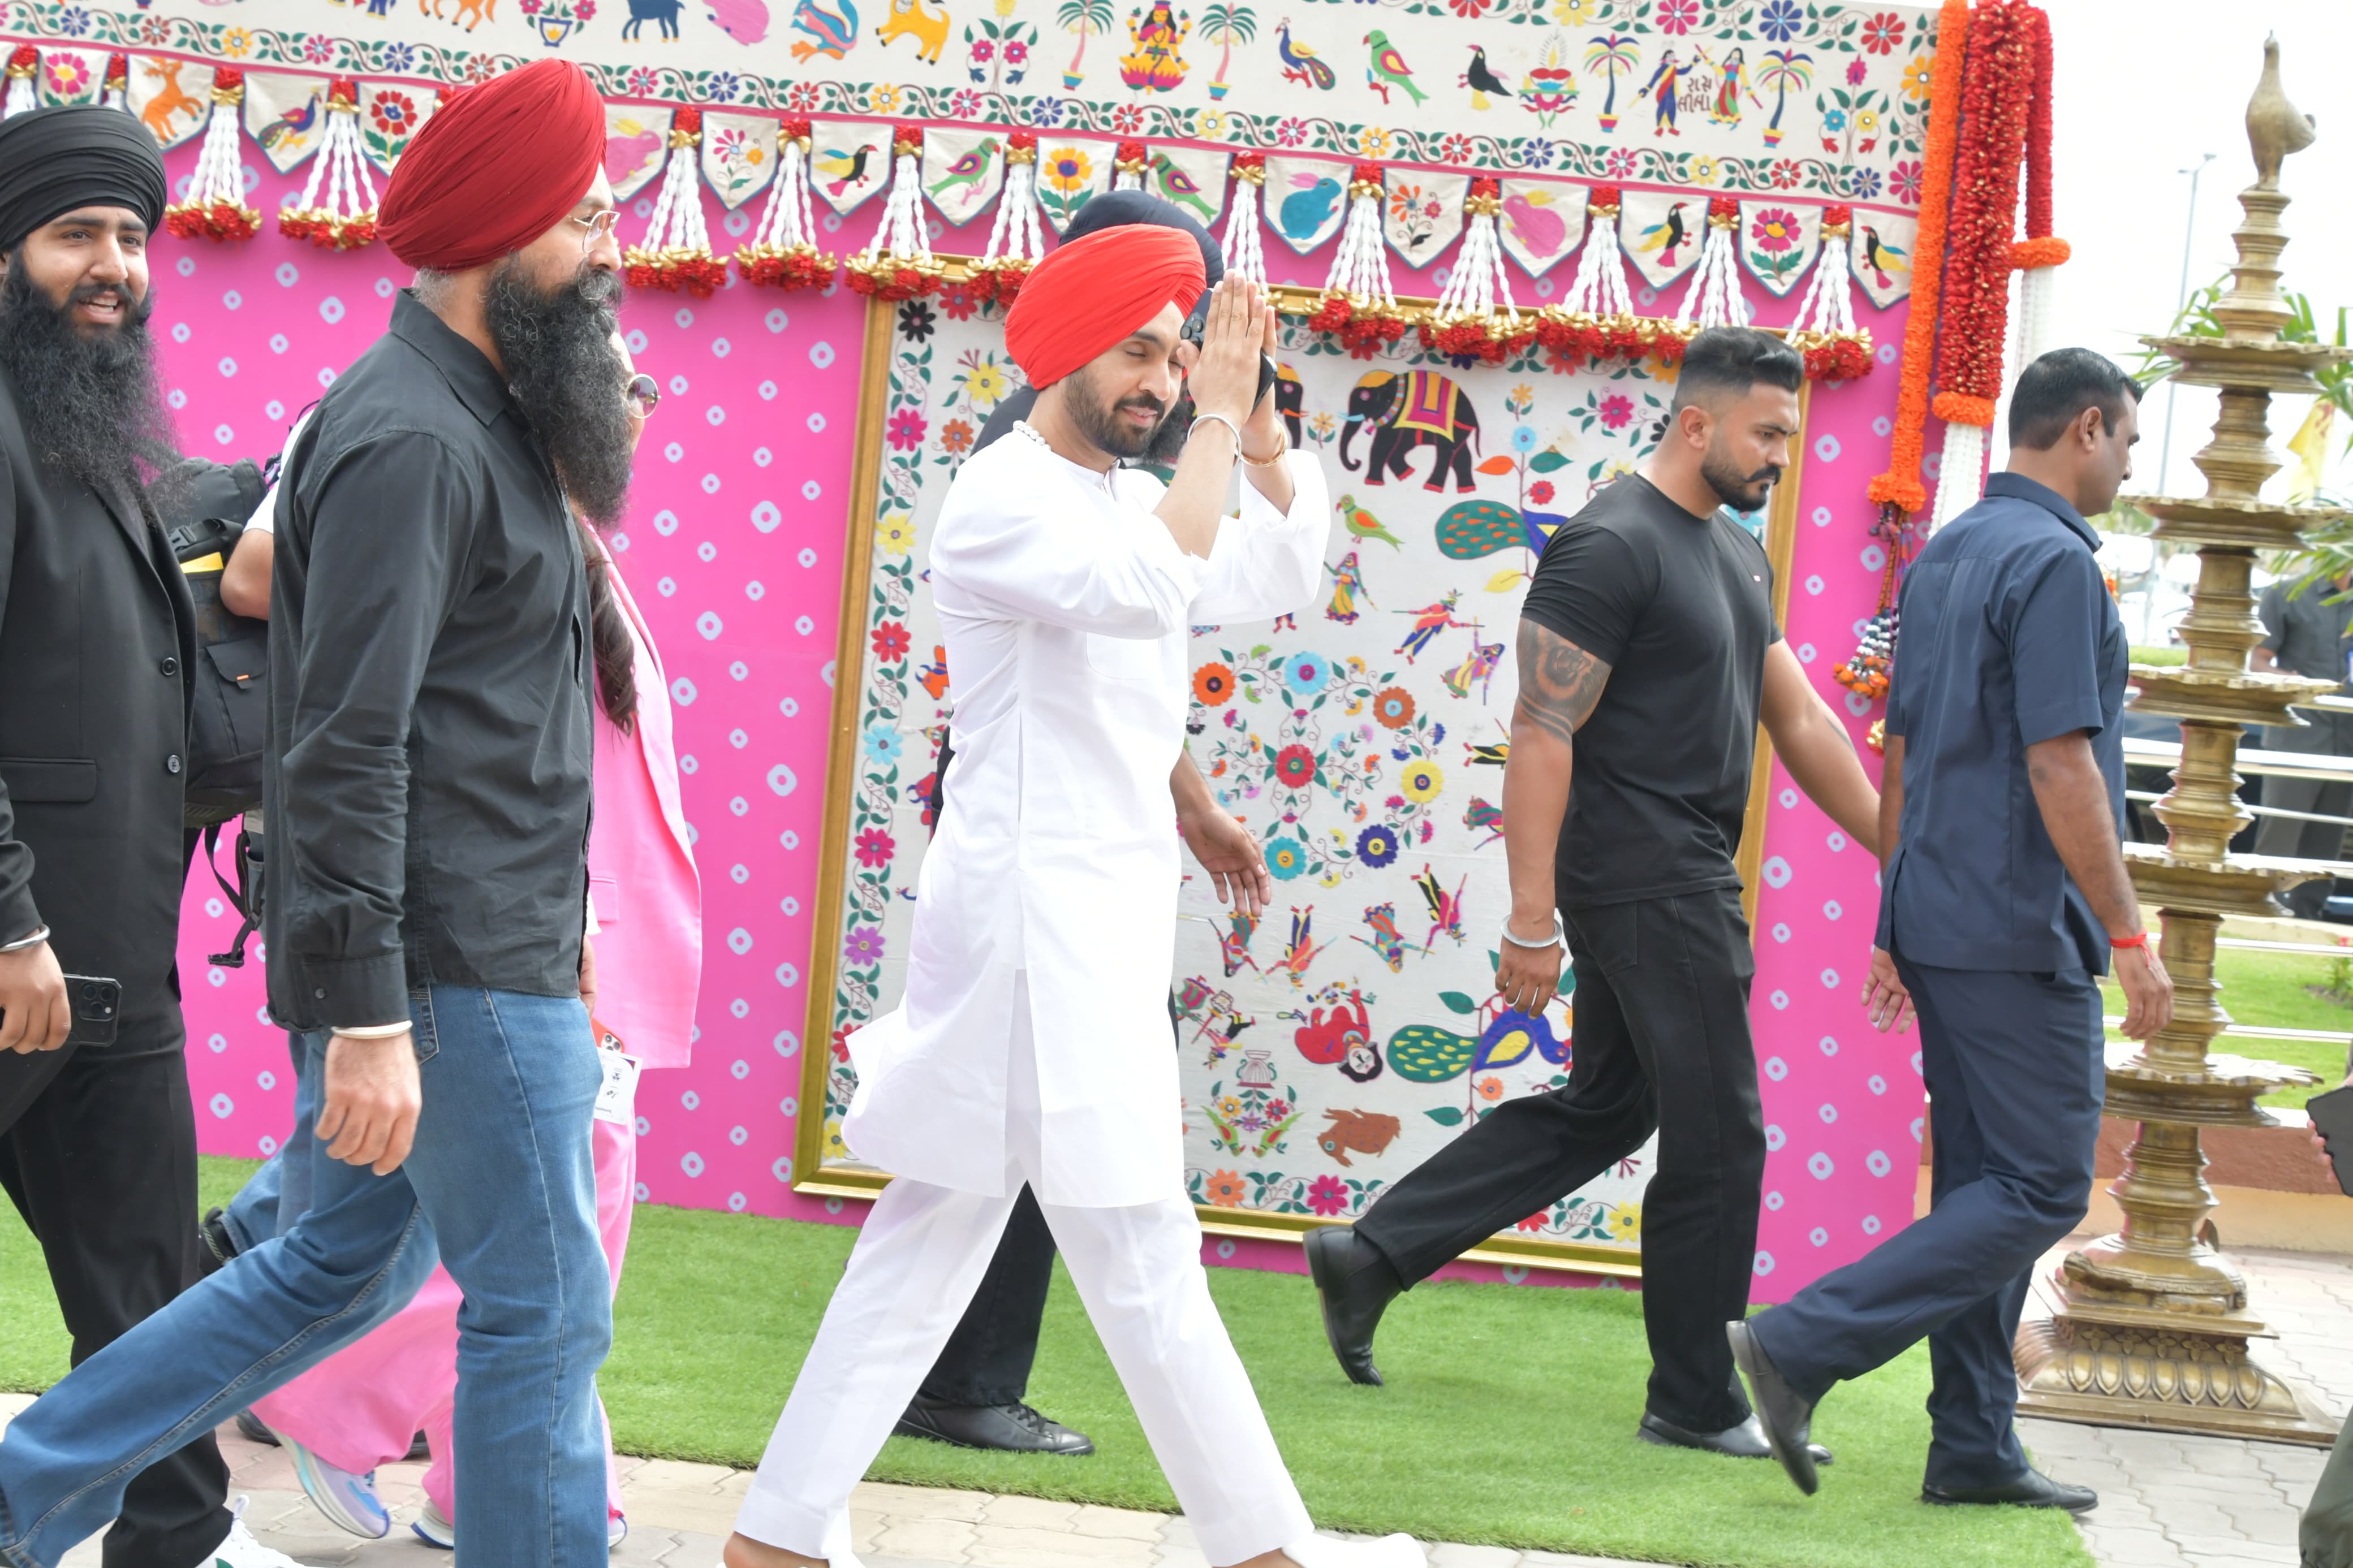 Diljit Dosanjh, who will reportedly perform at the function, reached Jamnagar this morning